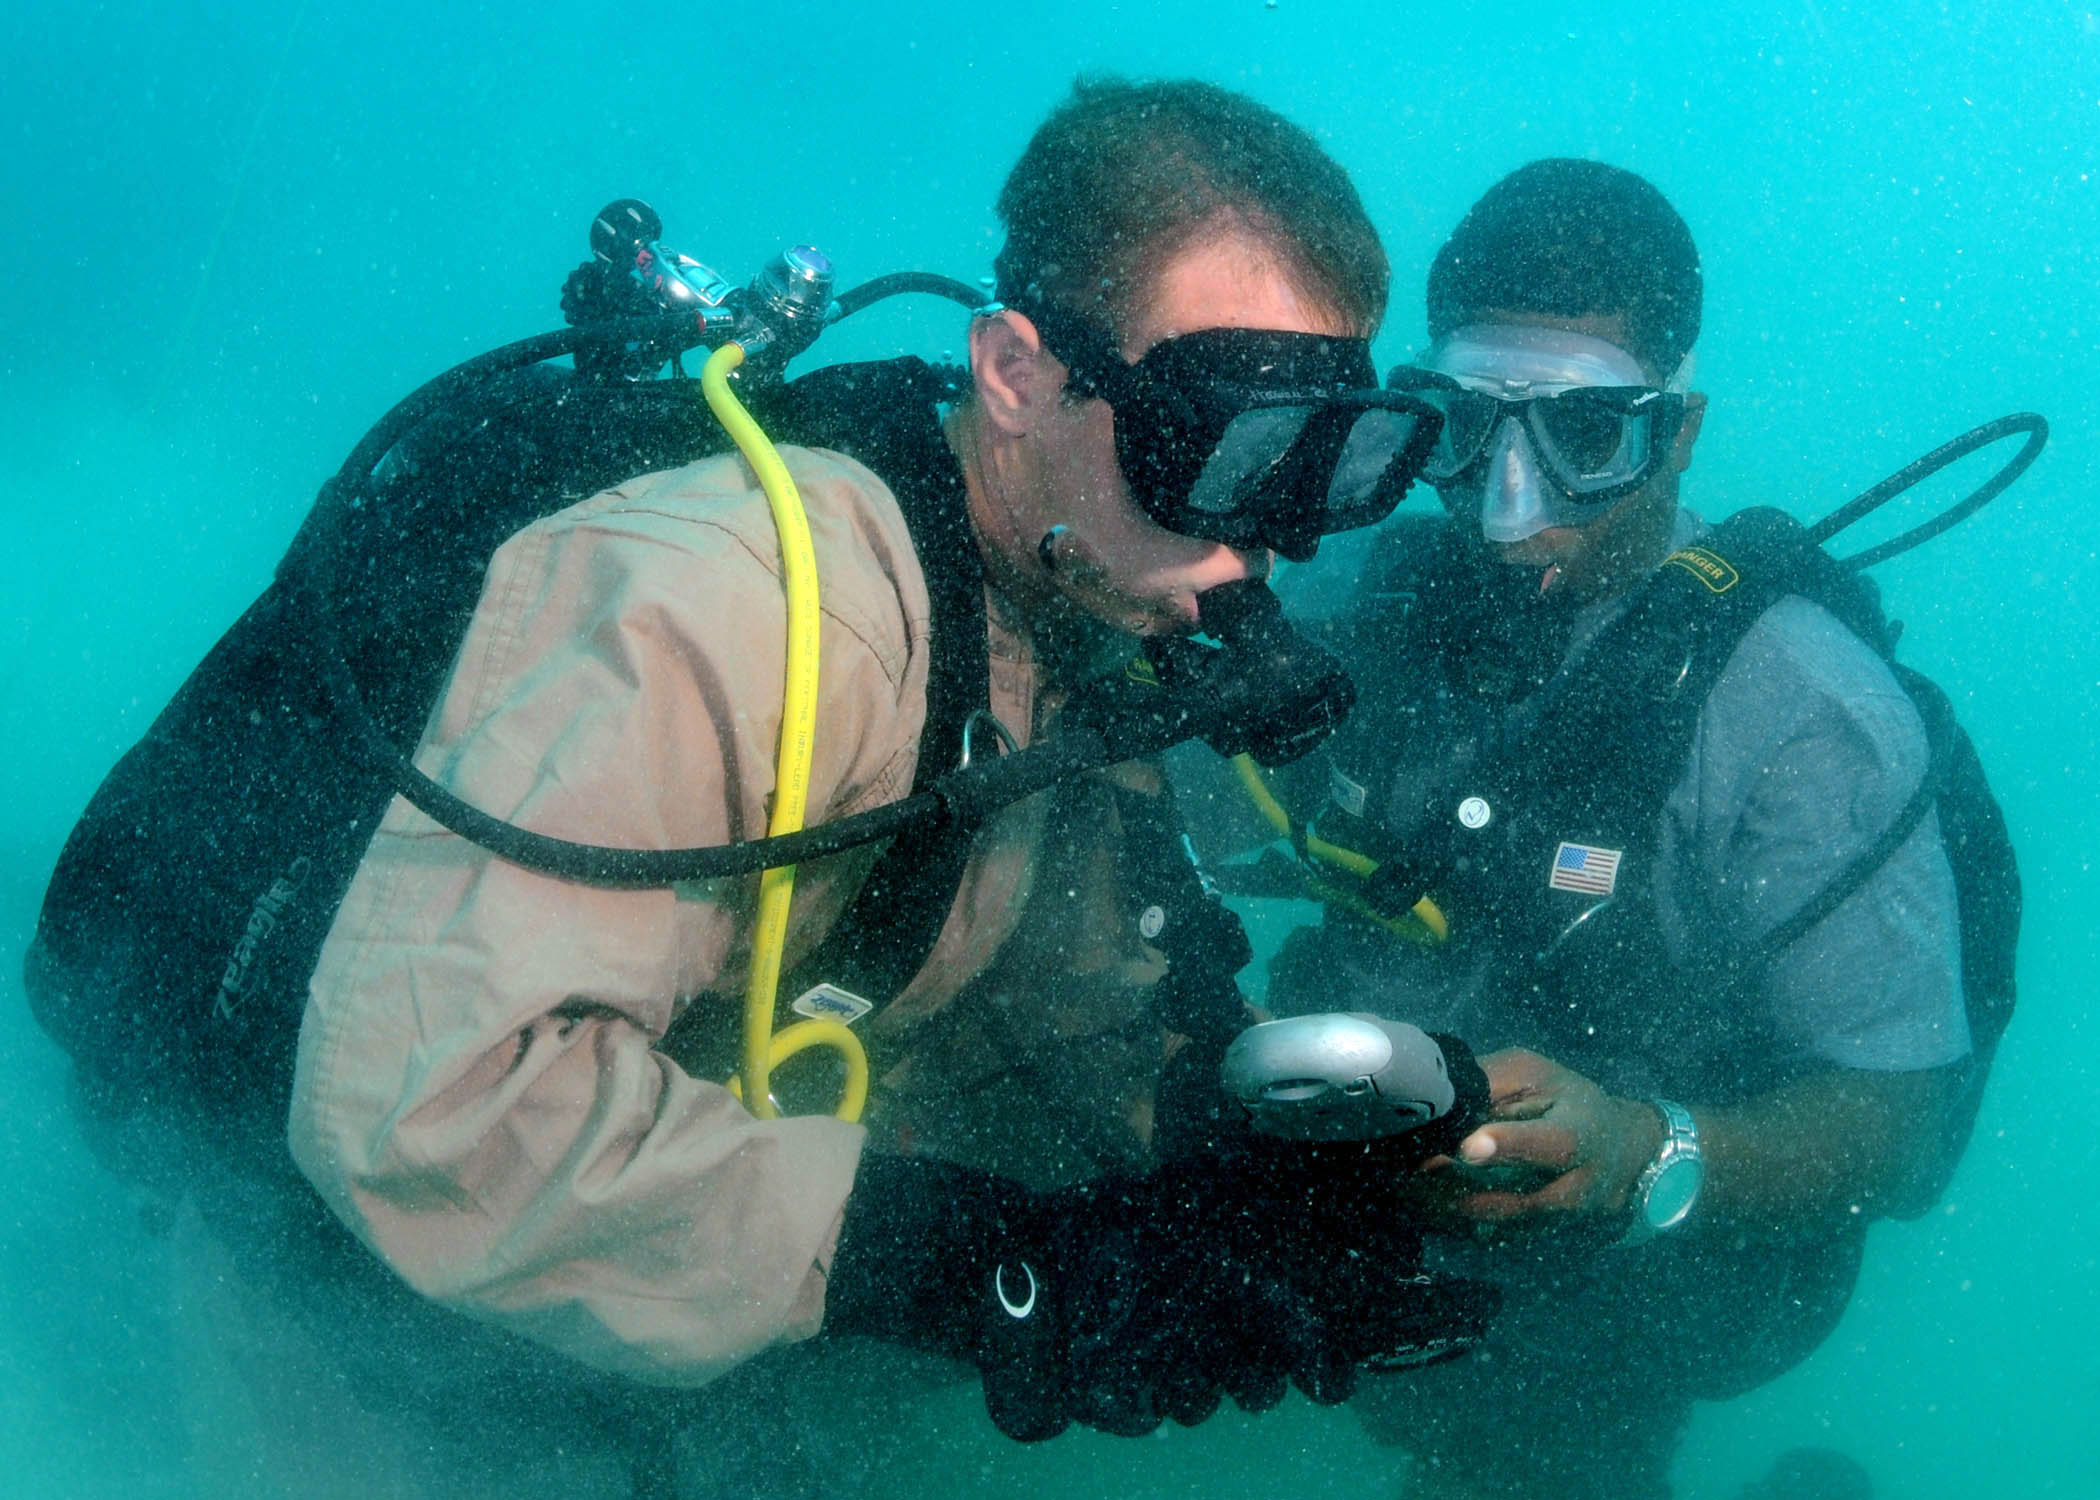 two people under water with equipment and scuba gear